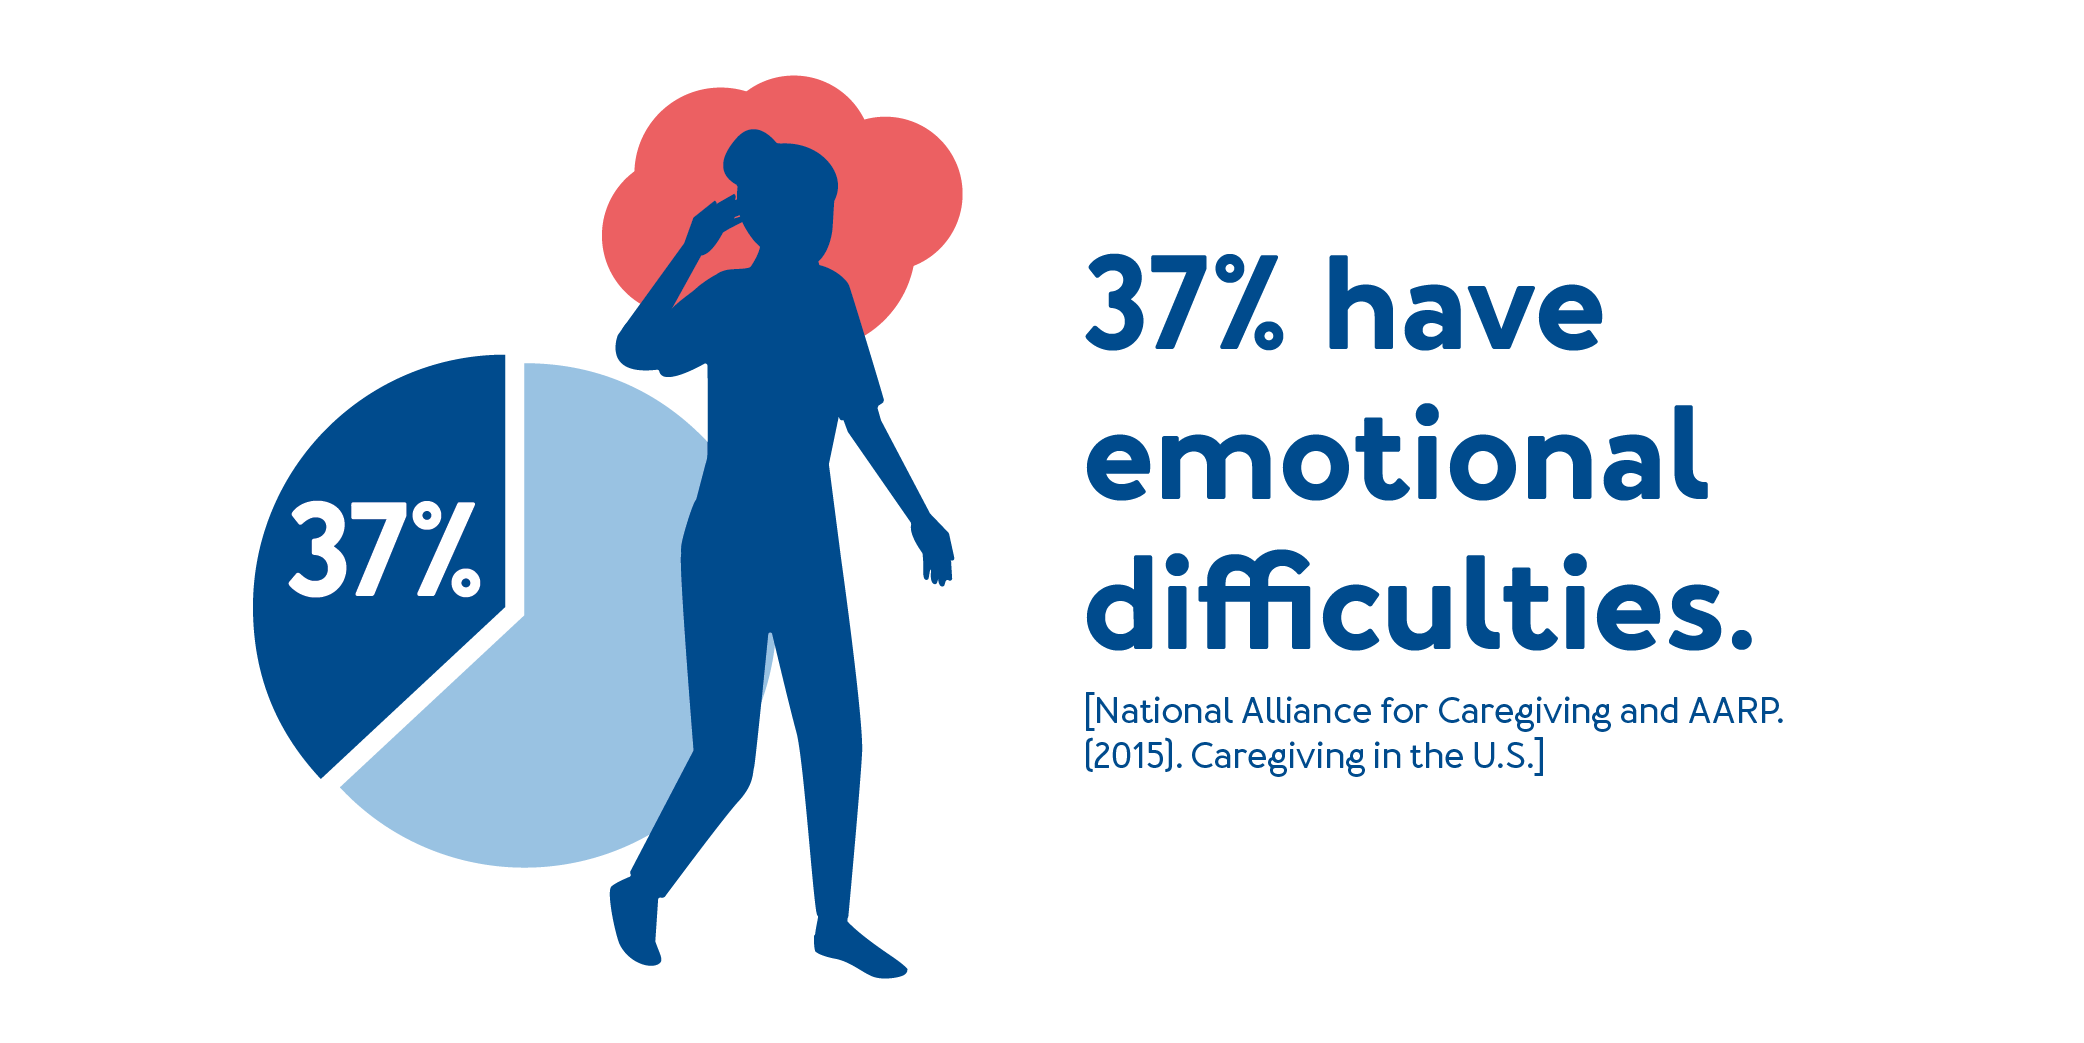 37% of caregivers have emotional difficulties [National Alliance for caregiving and AARP.[2015] Caregiving in the U.S.]